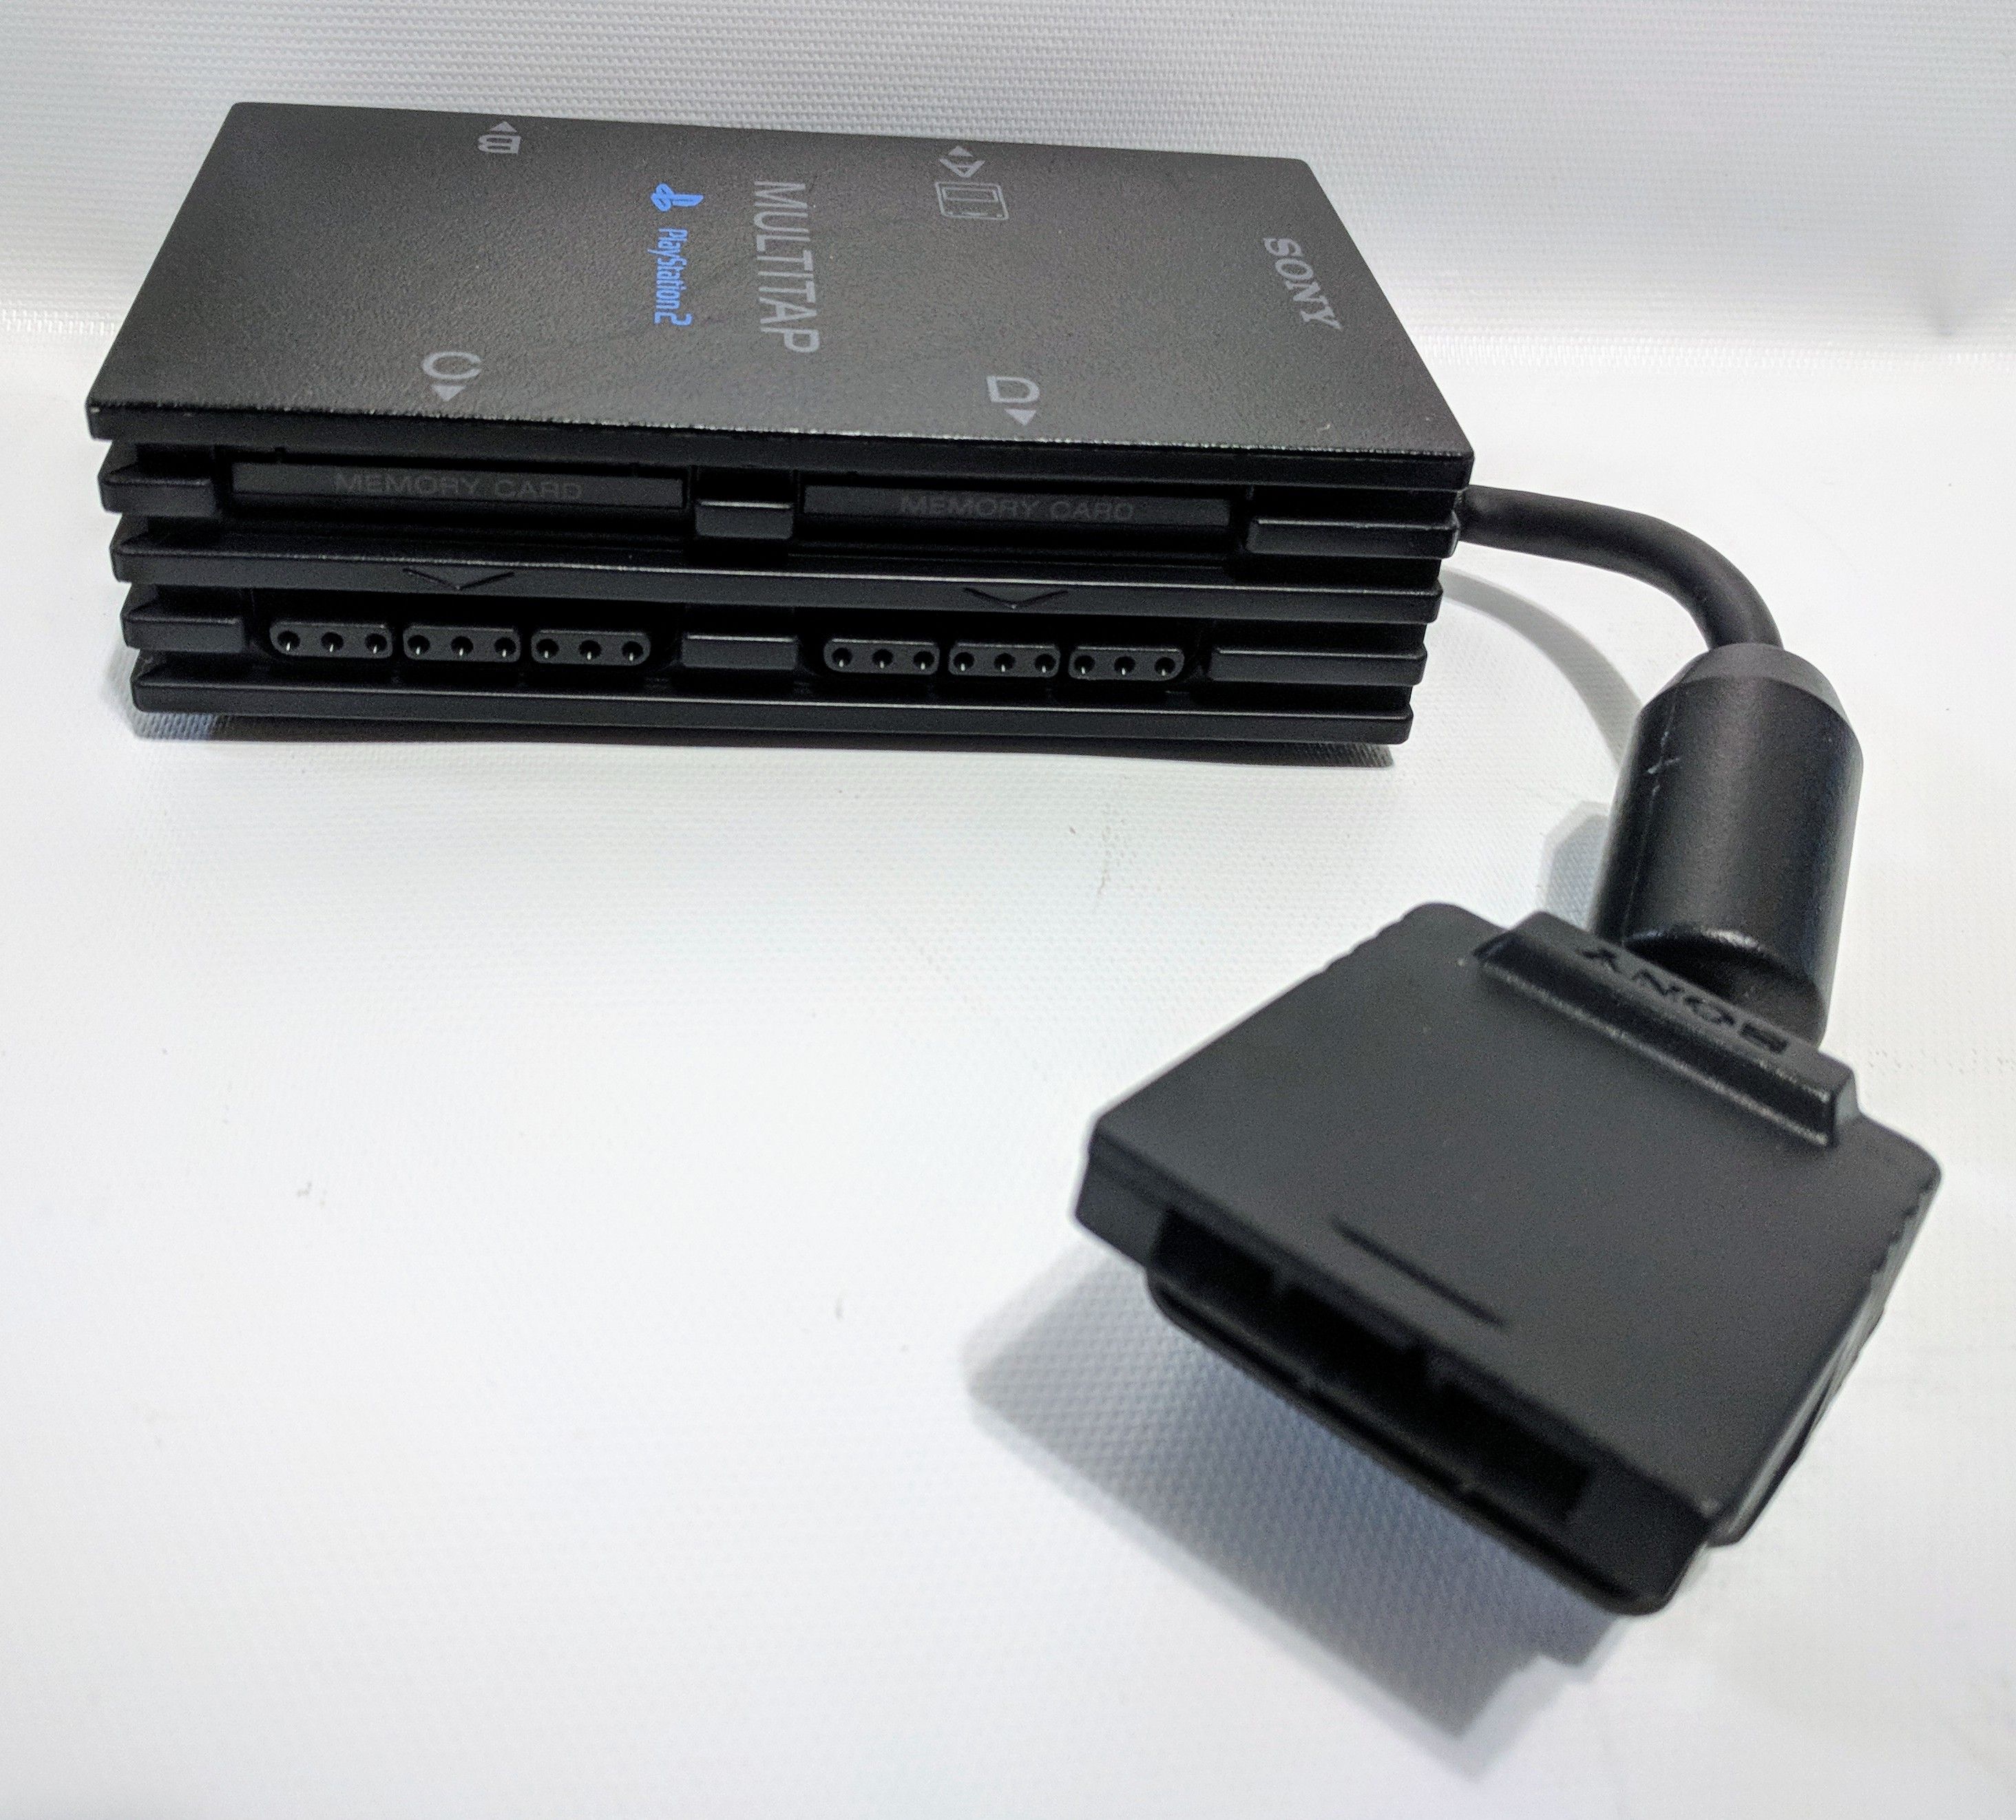 New Playstation 2 4 Player Multitap SCPH-10090 U Compatible